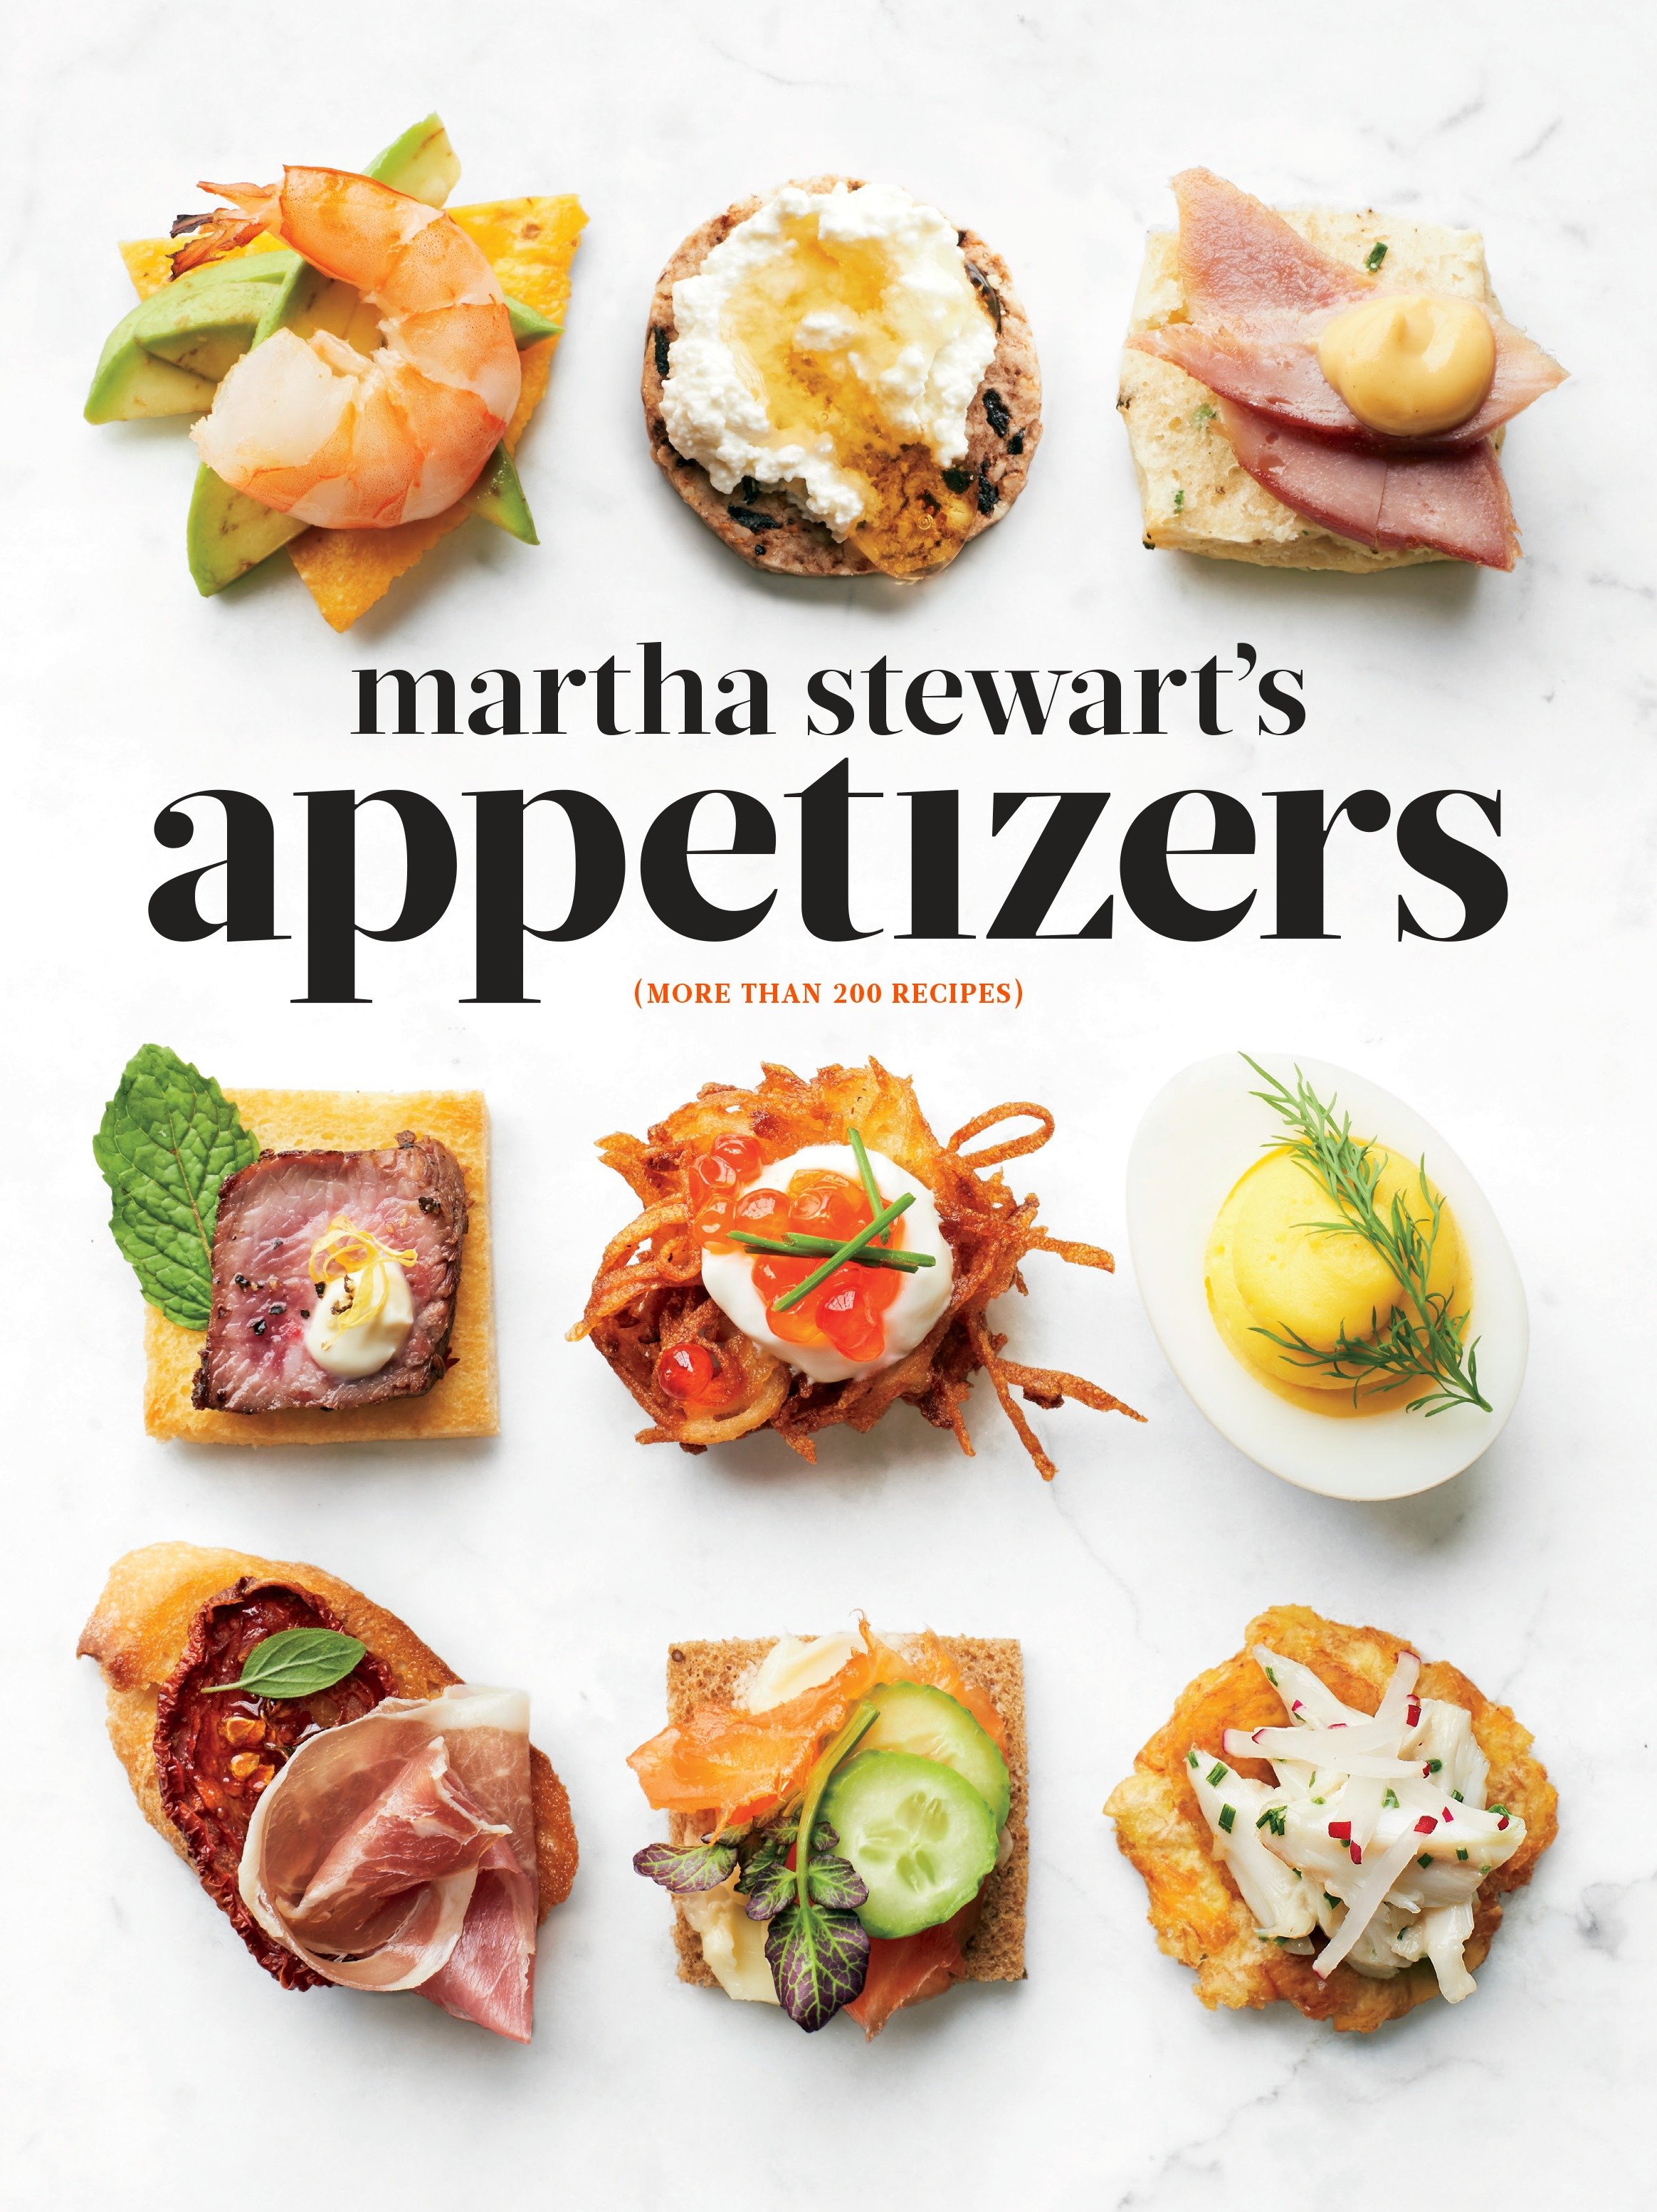 Martha Stewart's appetizers 200 recipes for dips, spreads, snacks, small plates, and other delicious hors d'oeuvres, plus 30 cocktails cover image